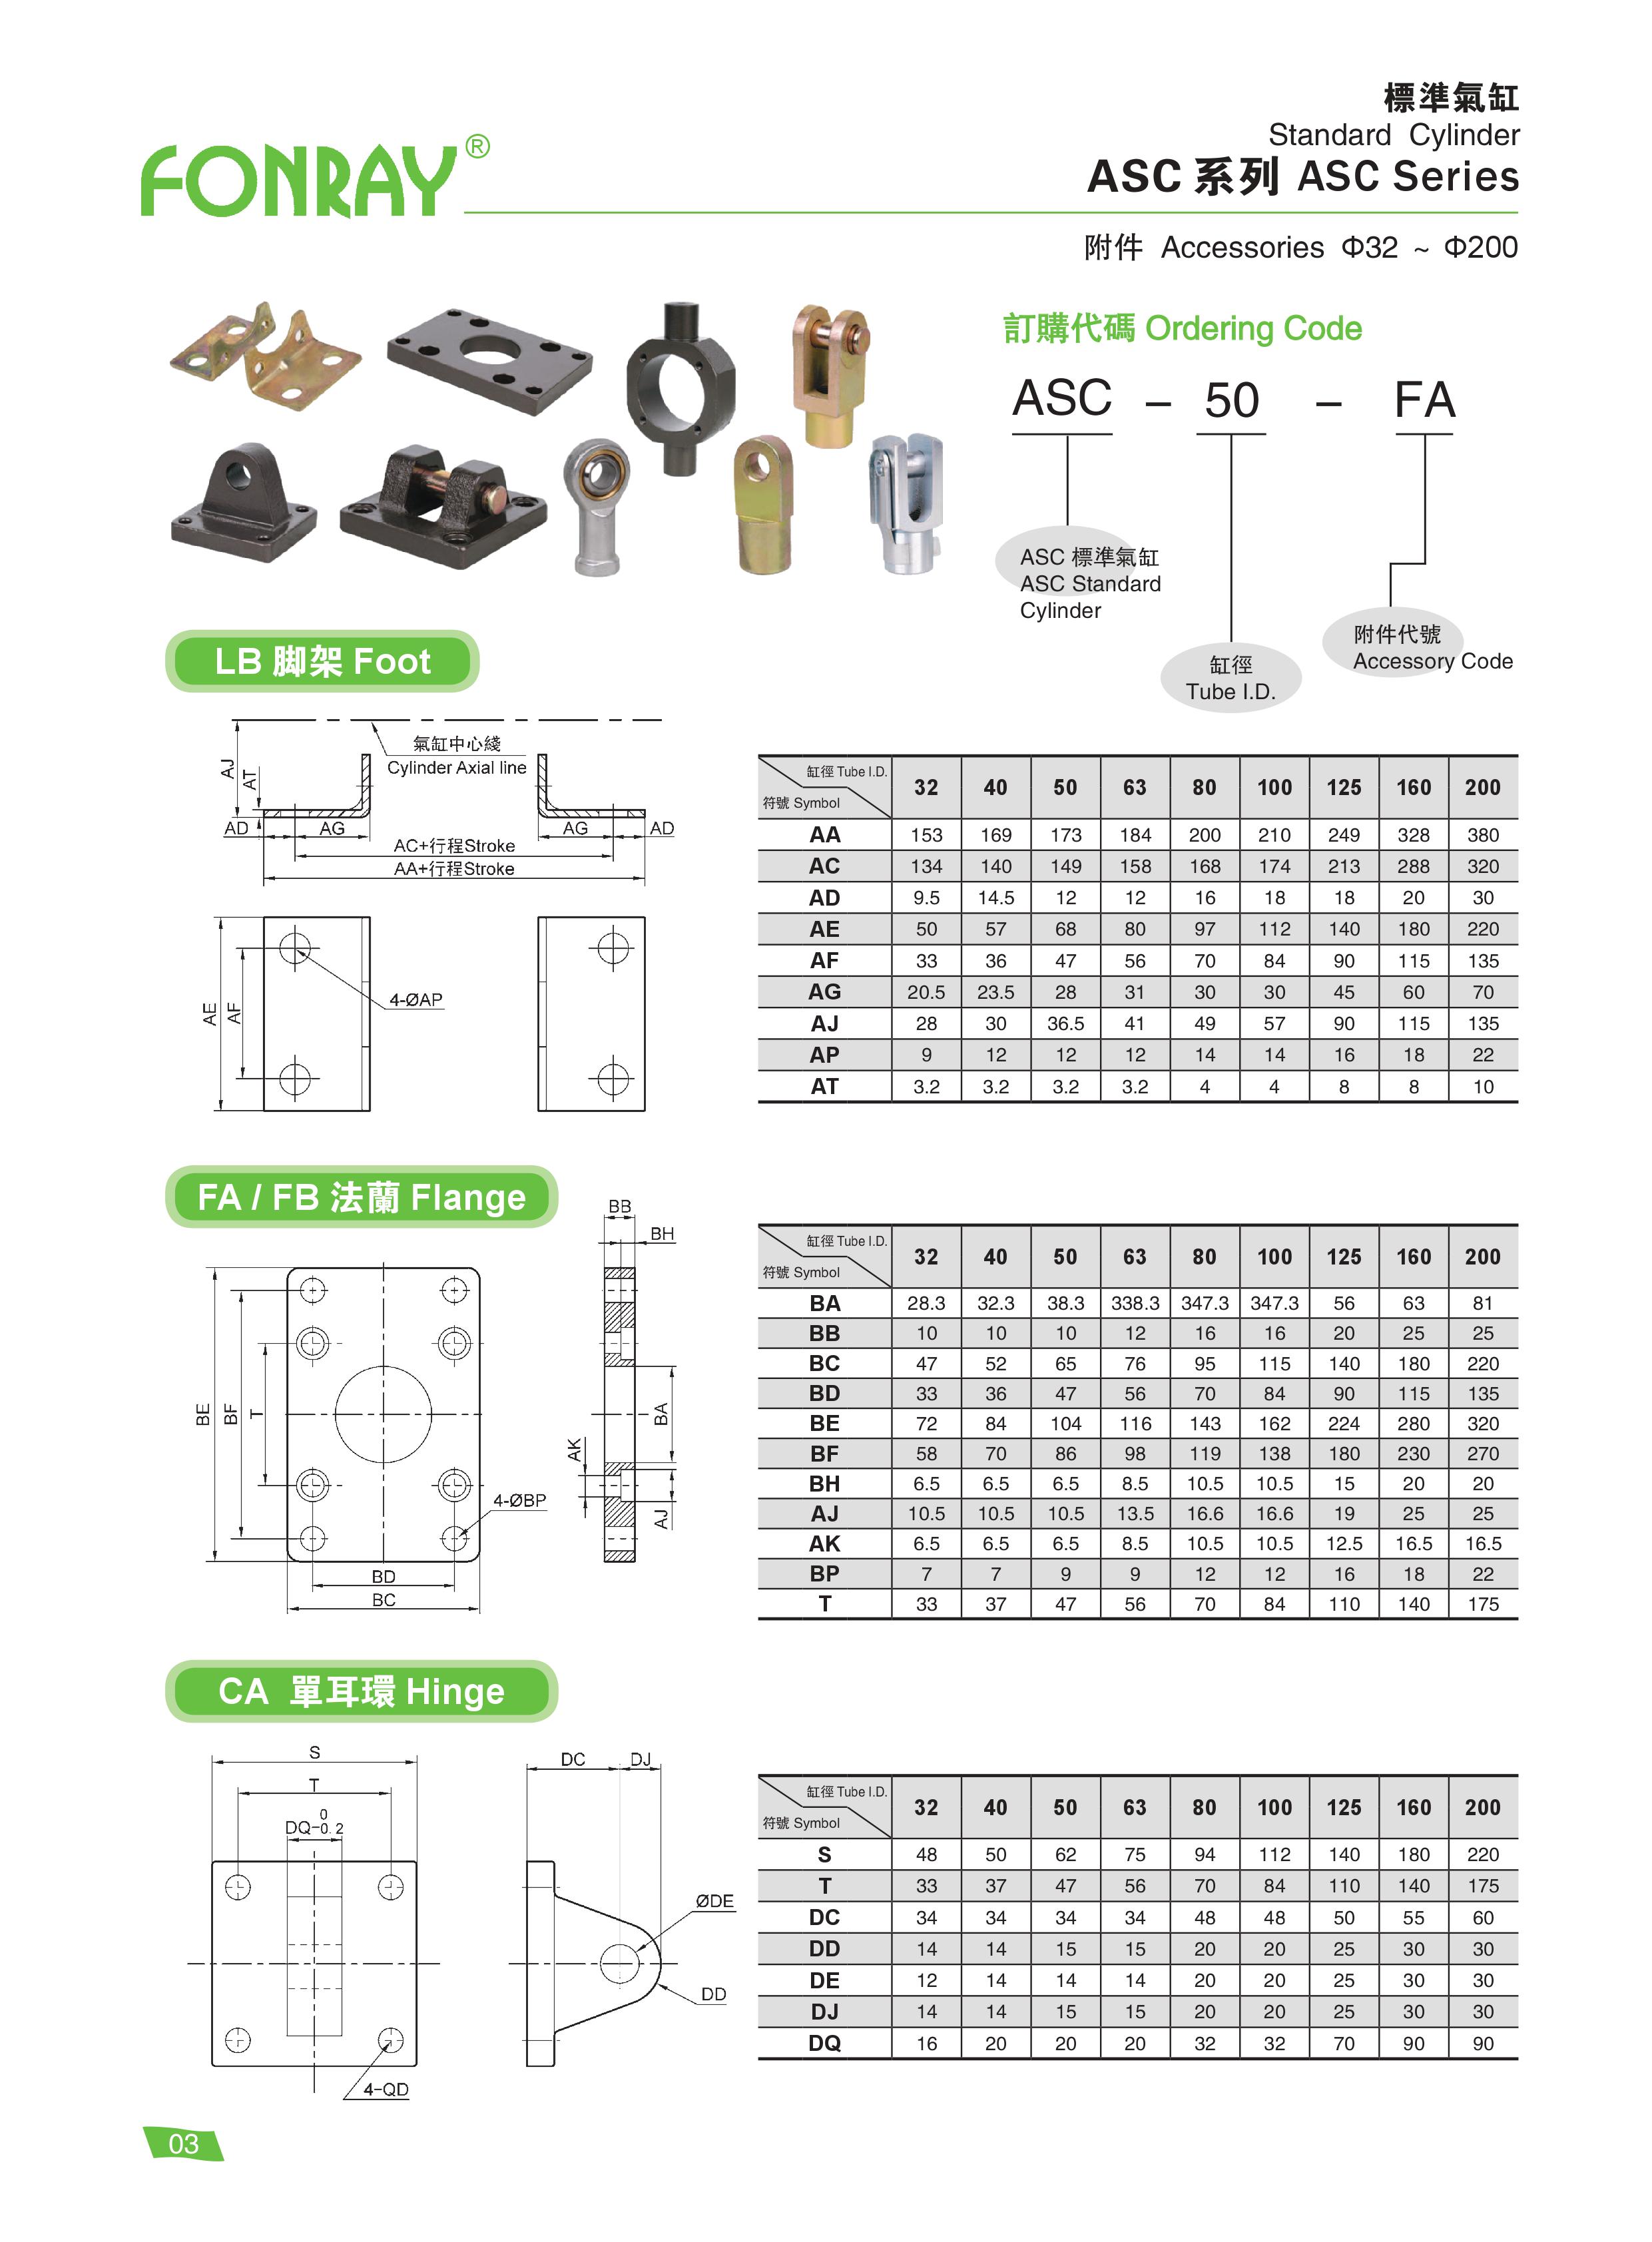 Standard Cylinders - ASC Standard Cylinders Accessories (LB)